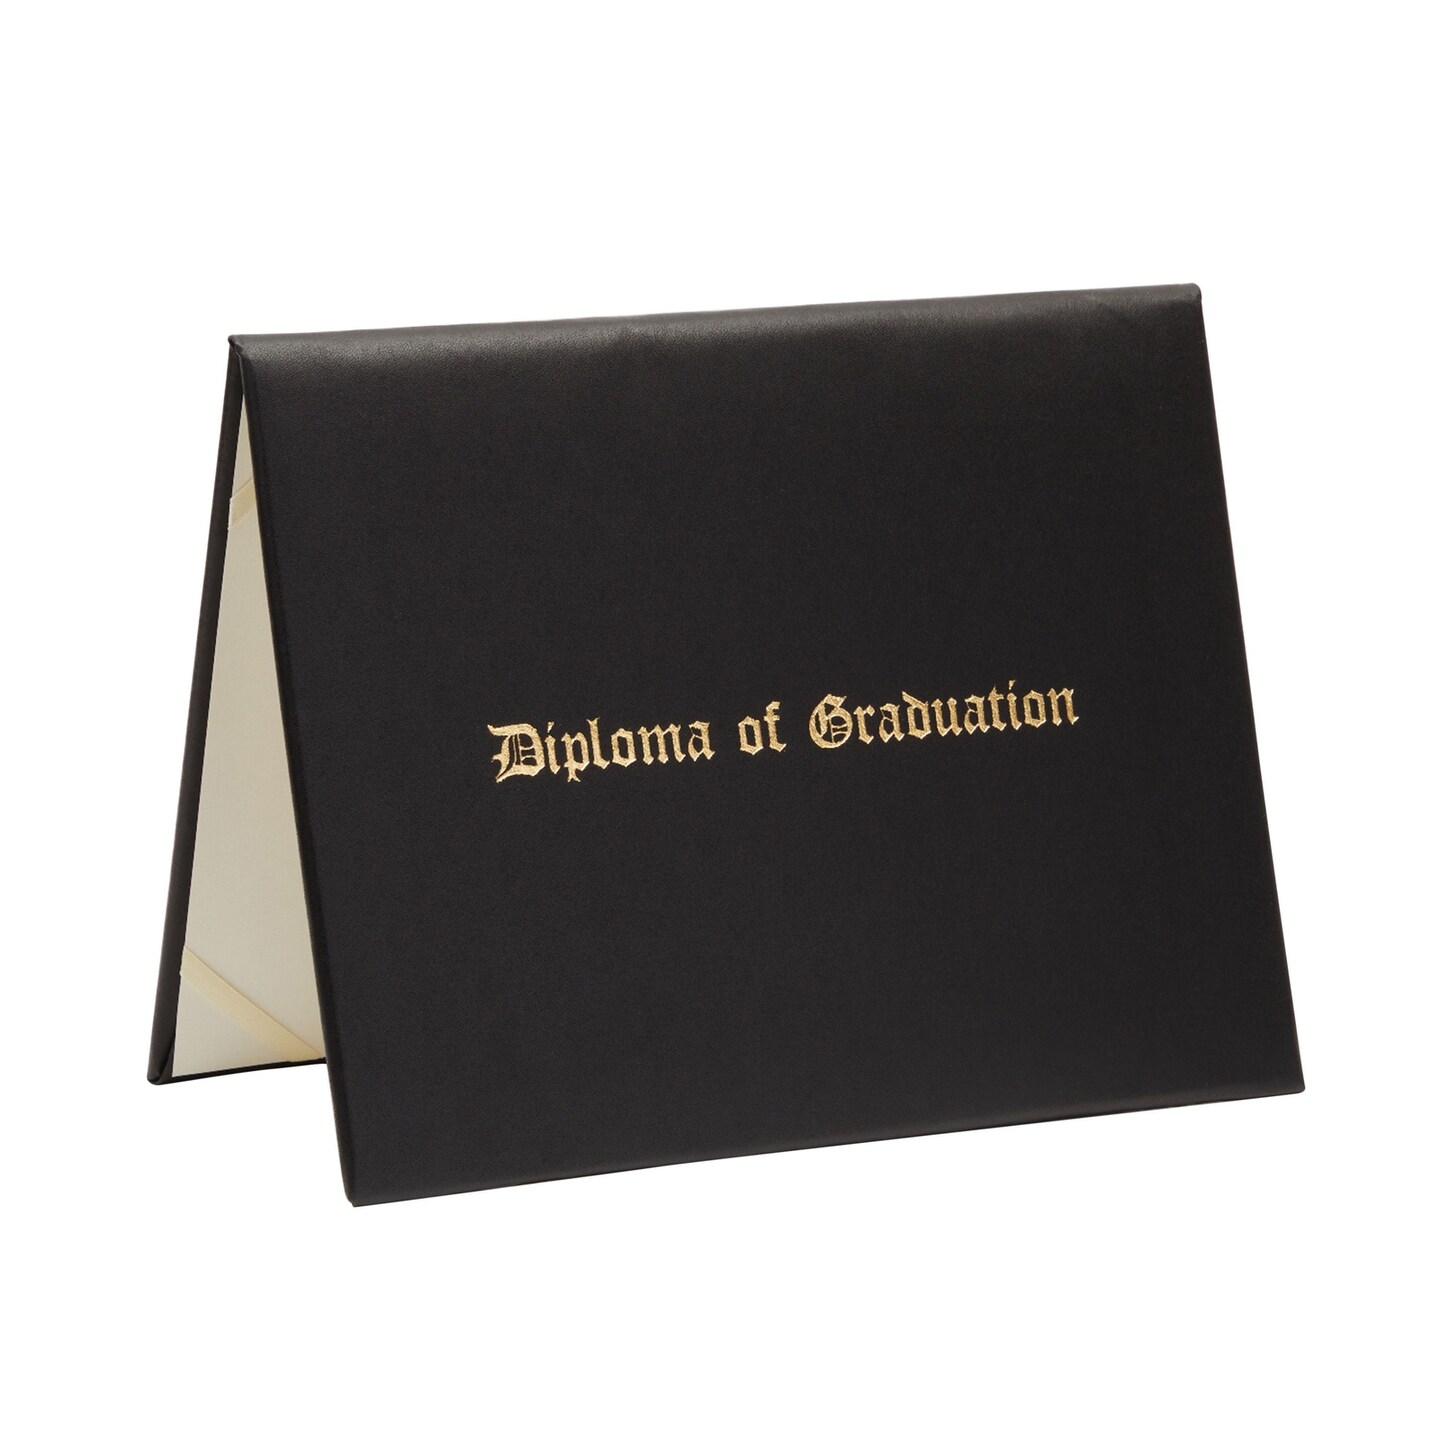 50 Sheets Gold Foil Certificate Paper for Printing - Customizable Blank  Cardstock with Border for Graduation Diploma, Achievement Awards,  Recognition